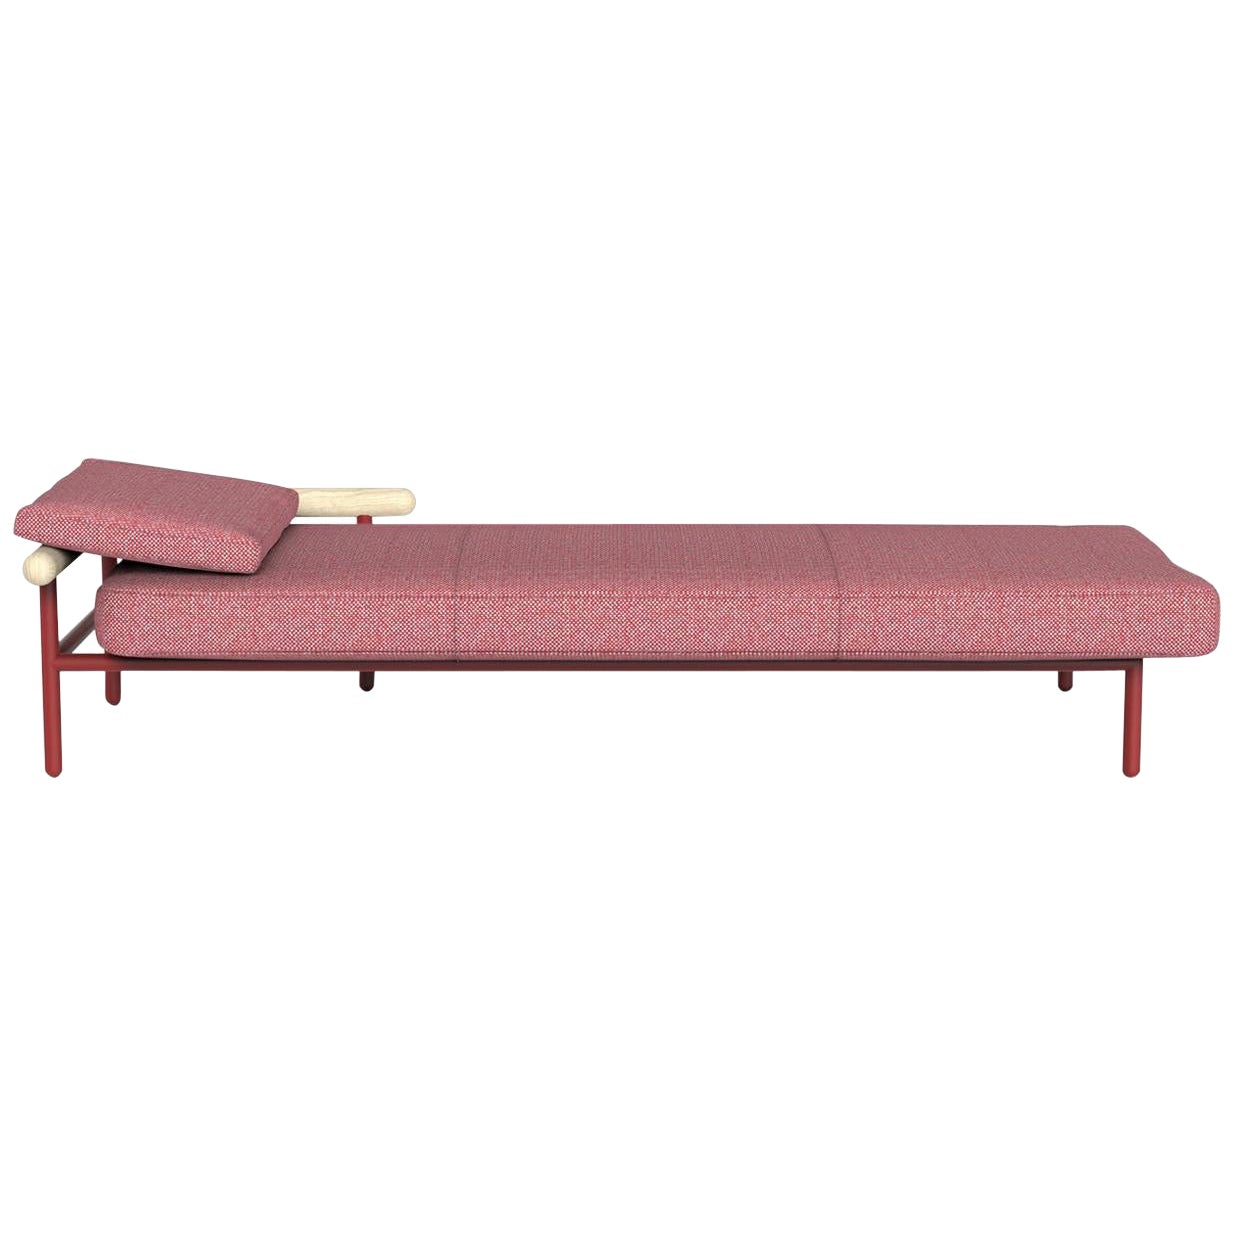 Upholstered "X-Rays" Daybed, Alain Gilles For Sale